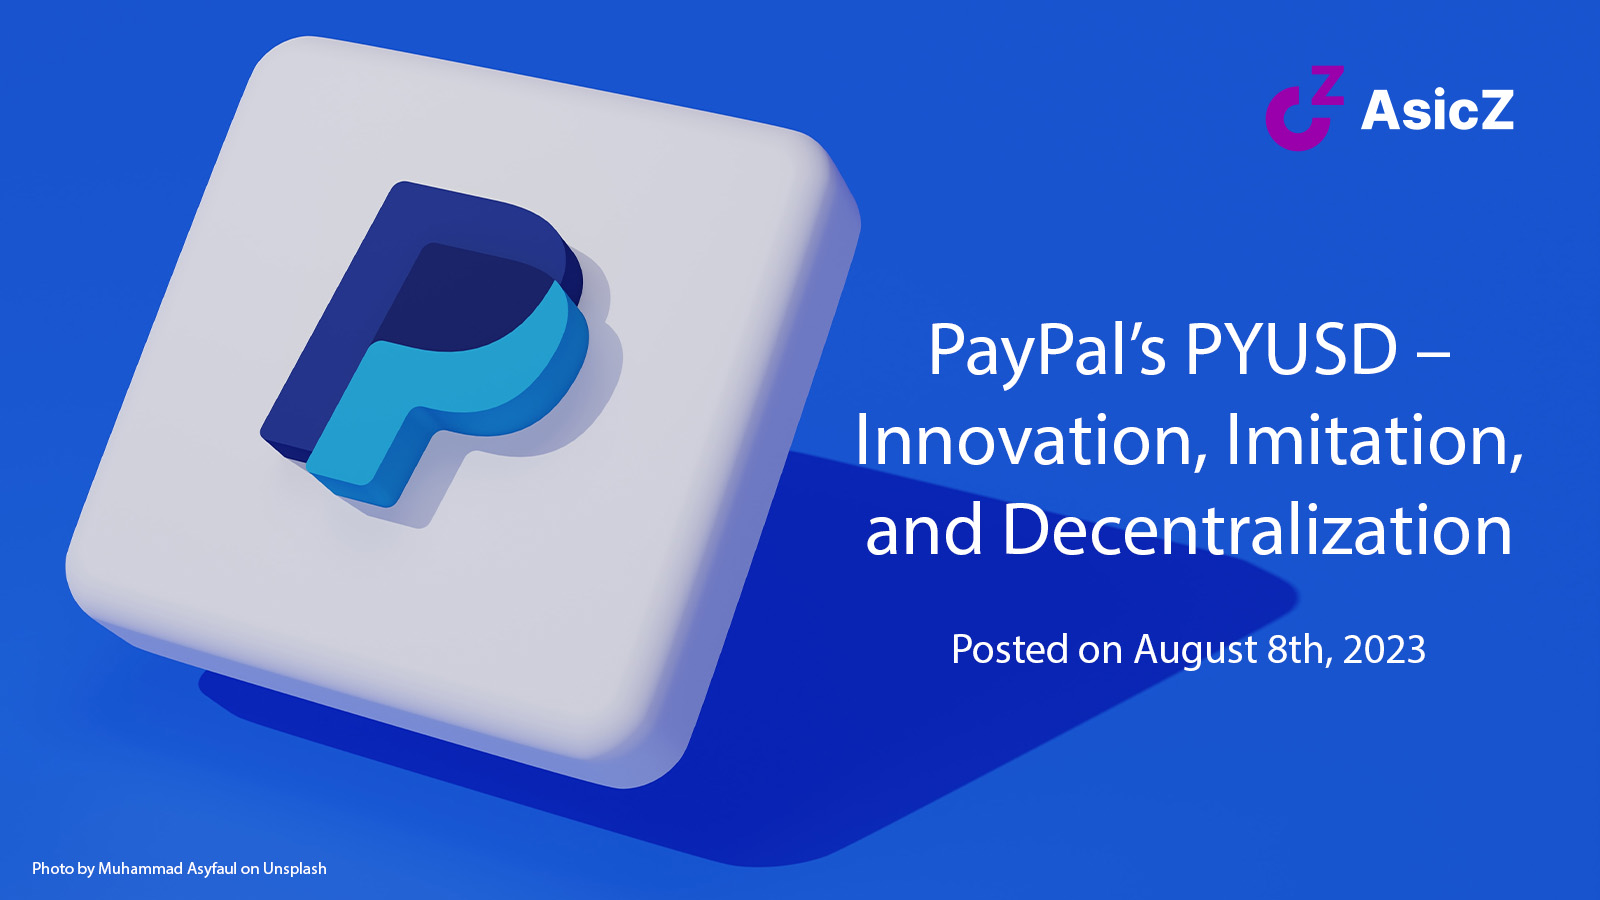 PayPal’s PYUSD – Innovation, Imitation, and Decentralization